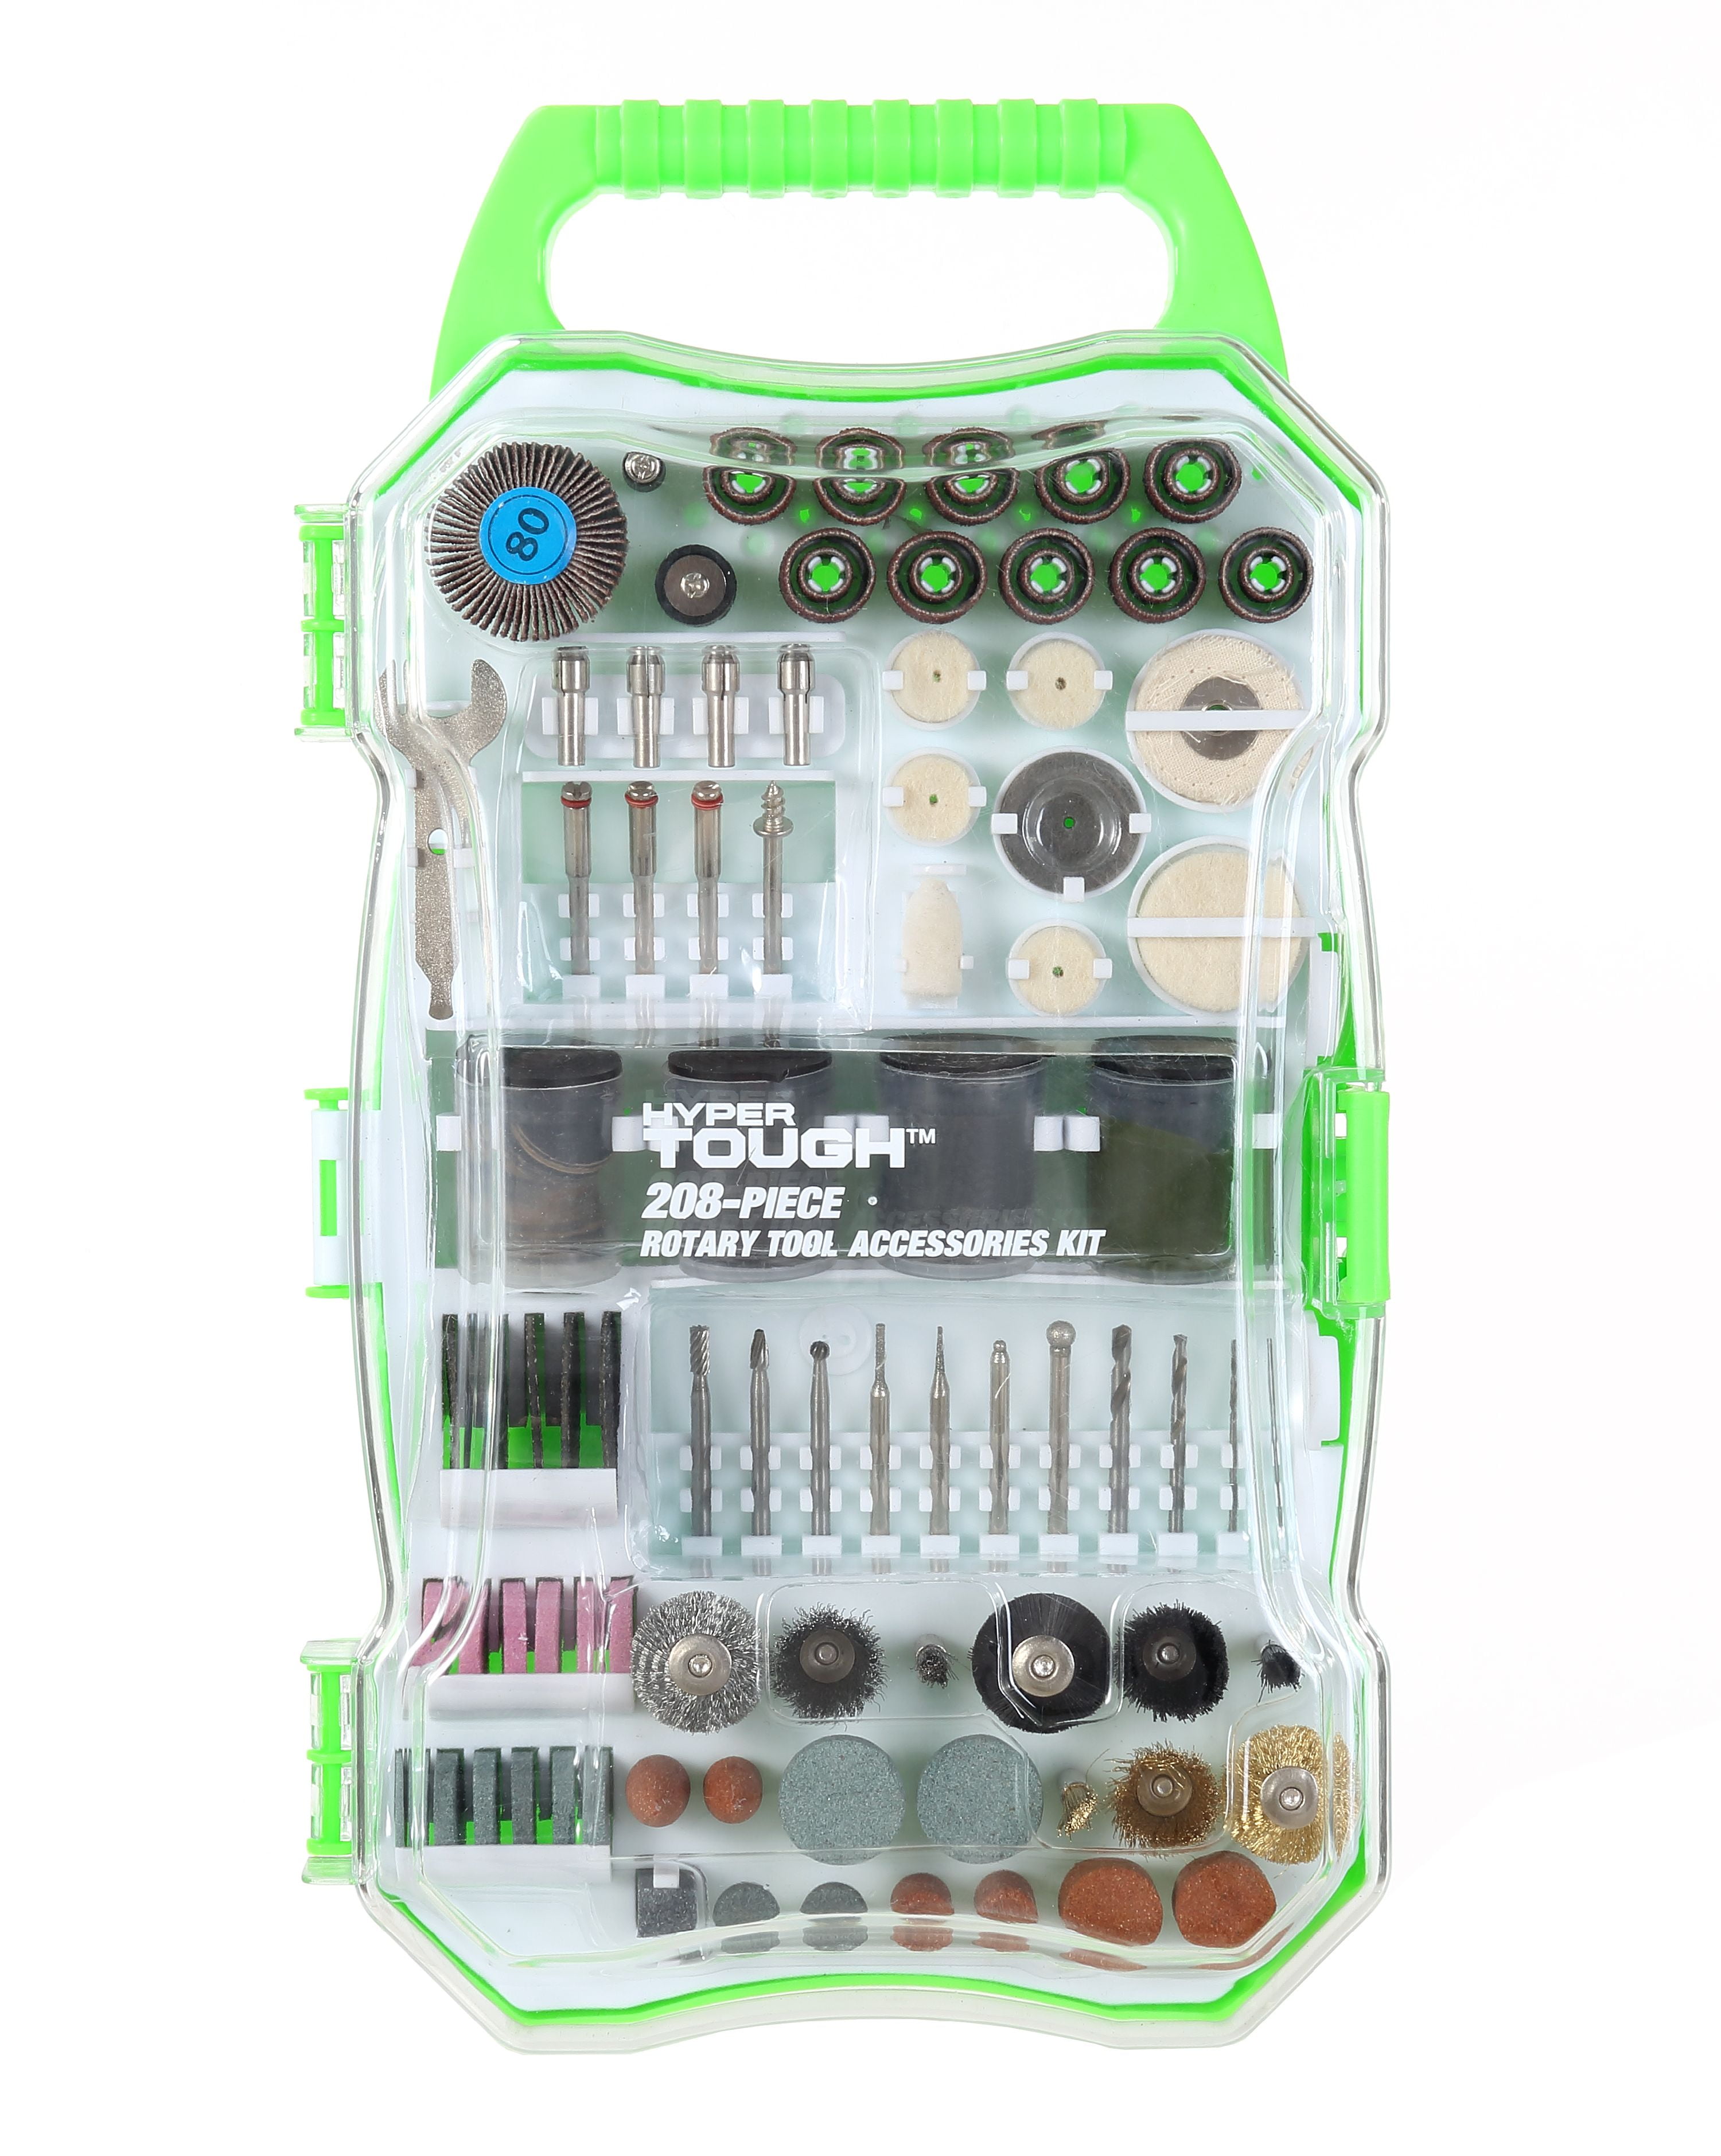 Hyper Tough 208-Piece Rotary Tool Accessory Kit with Storage Case 